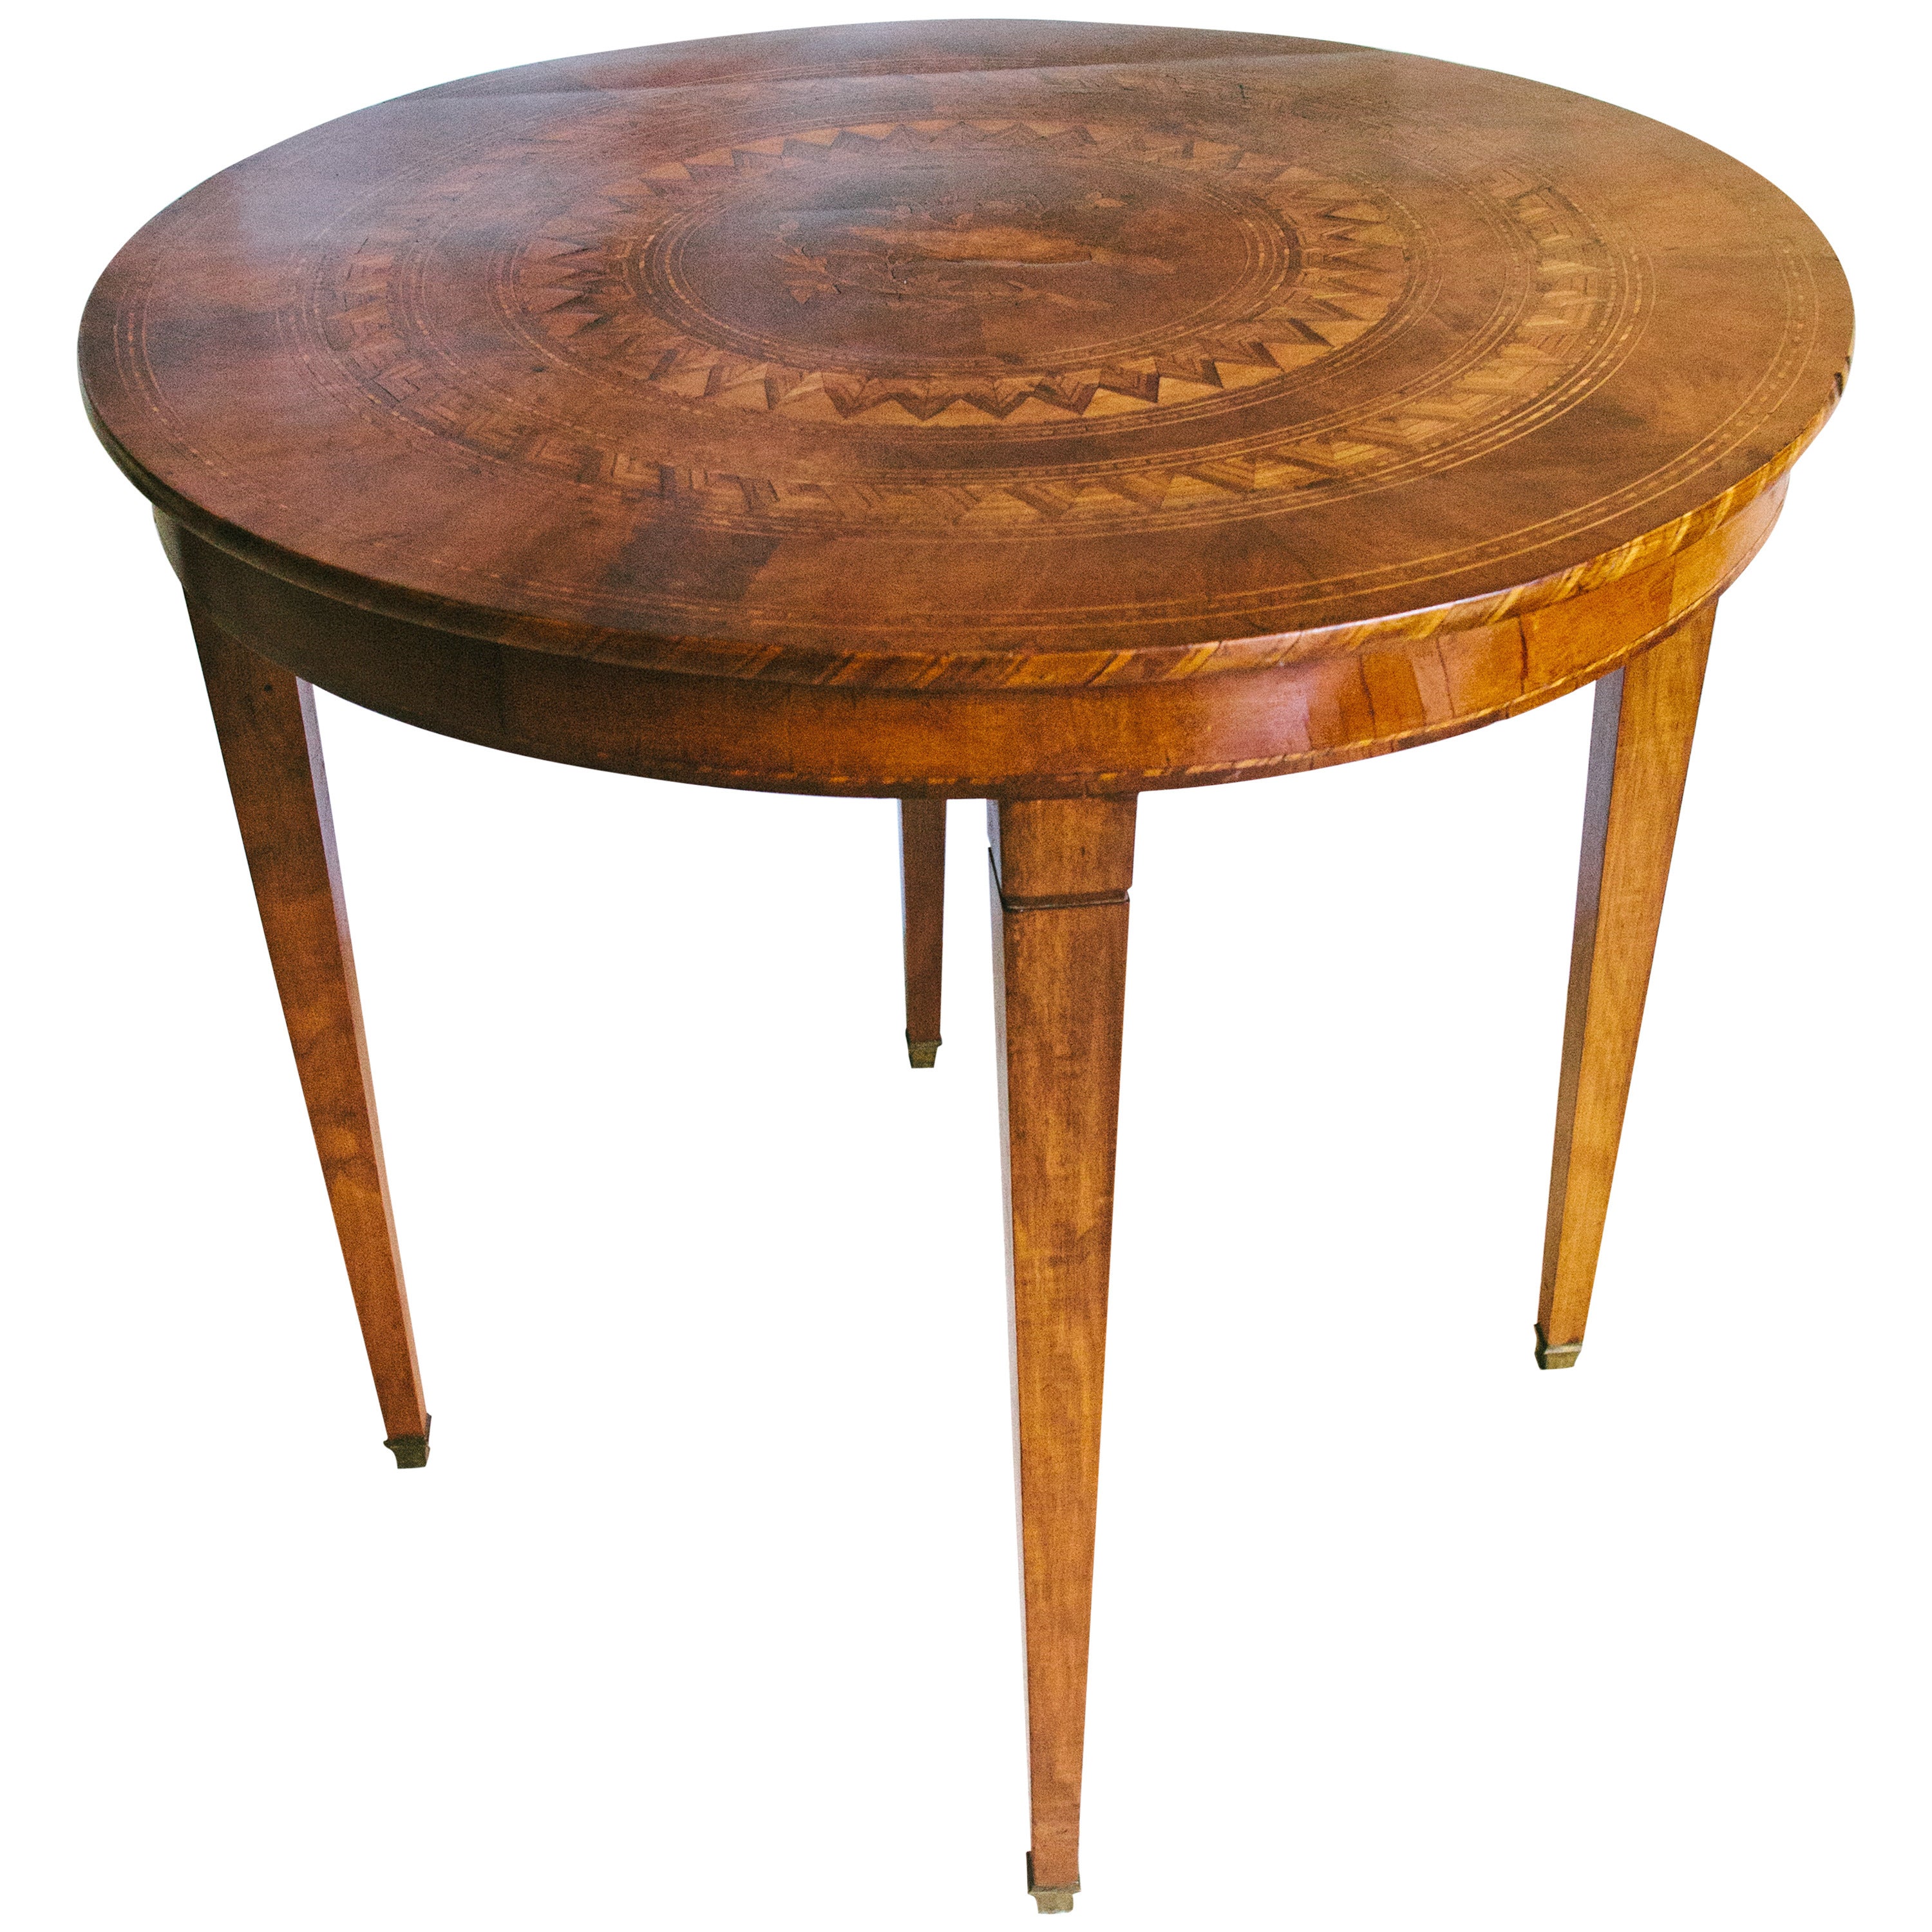 19th Century Continental Walnut Marquetry Table with Center Bird Motif